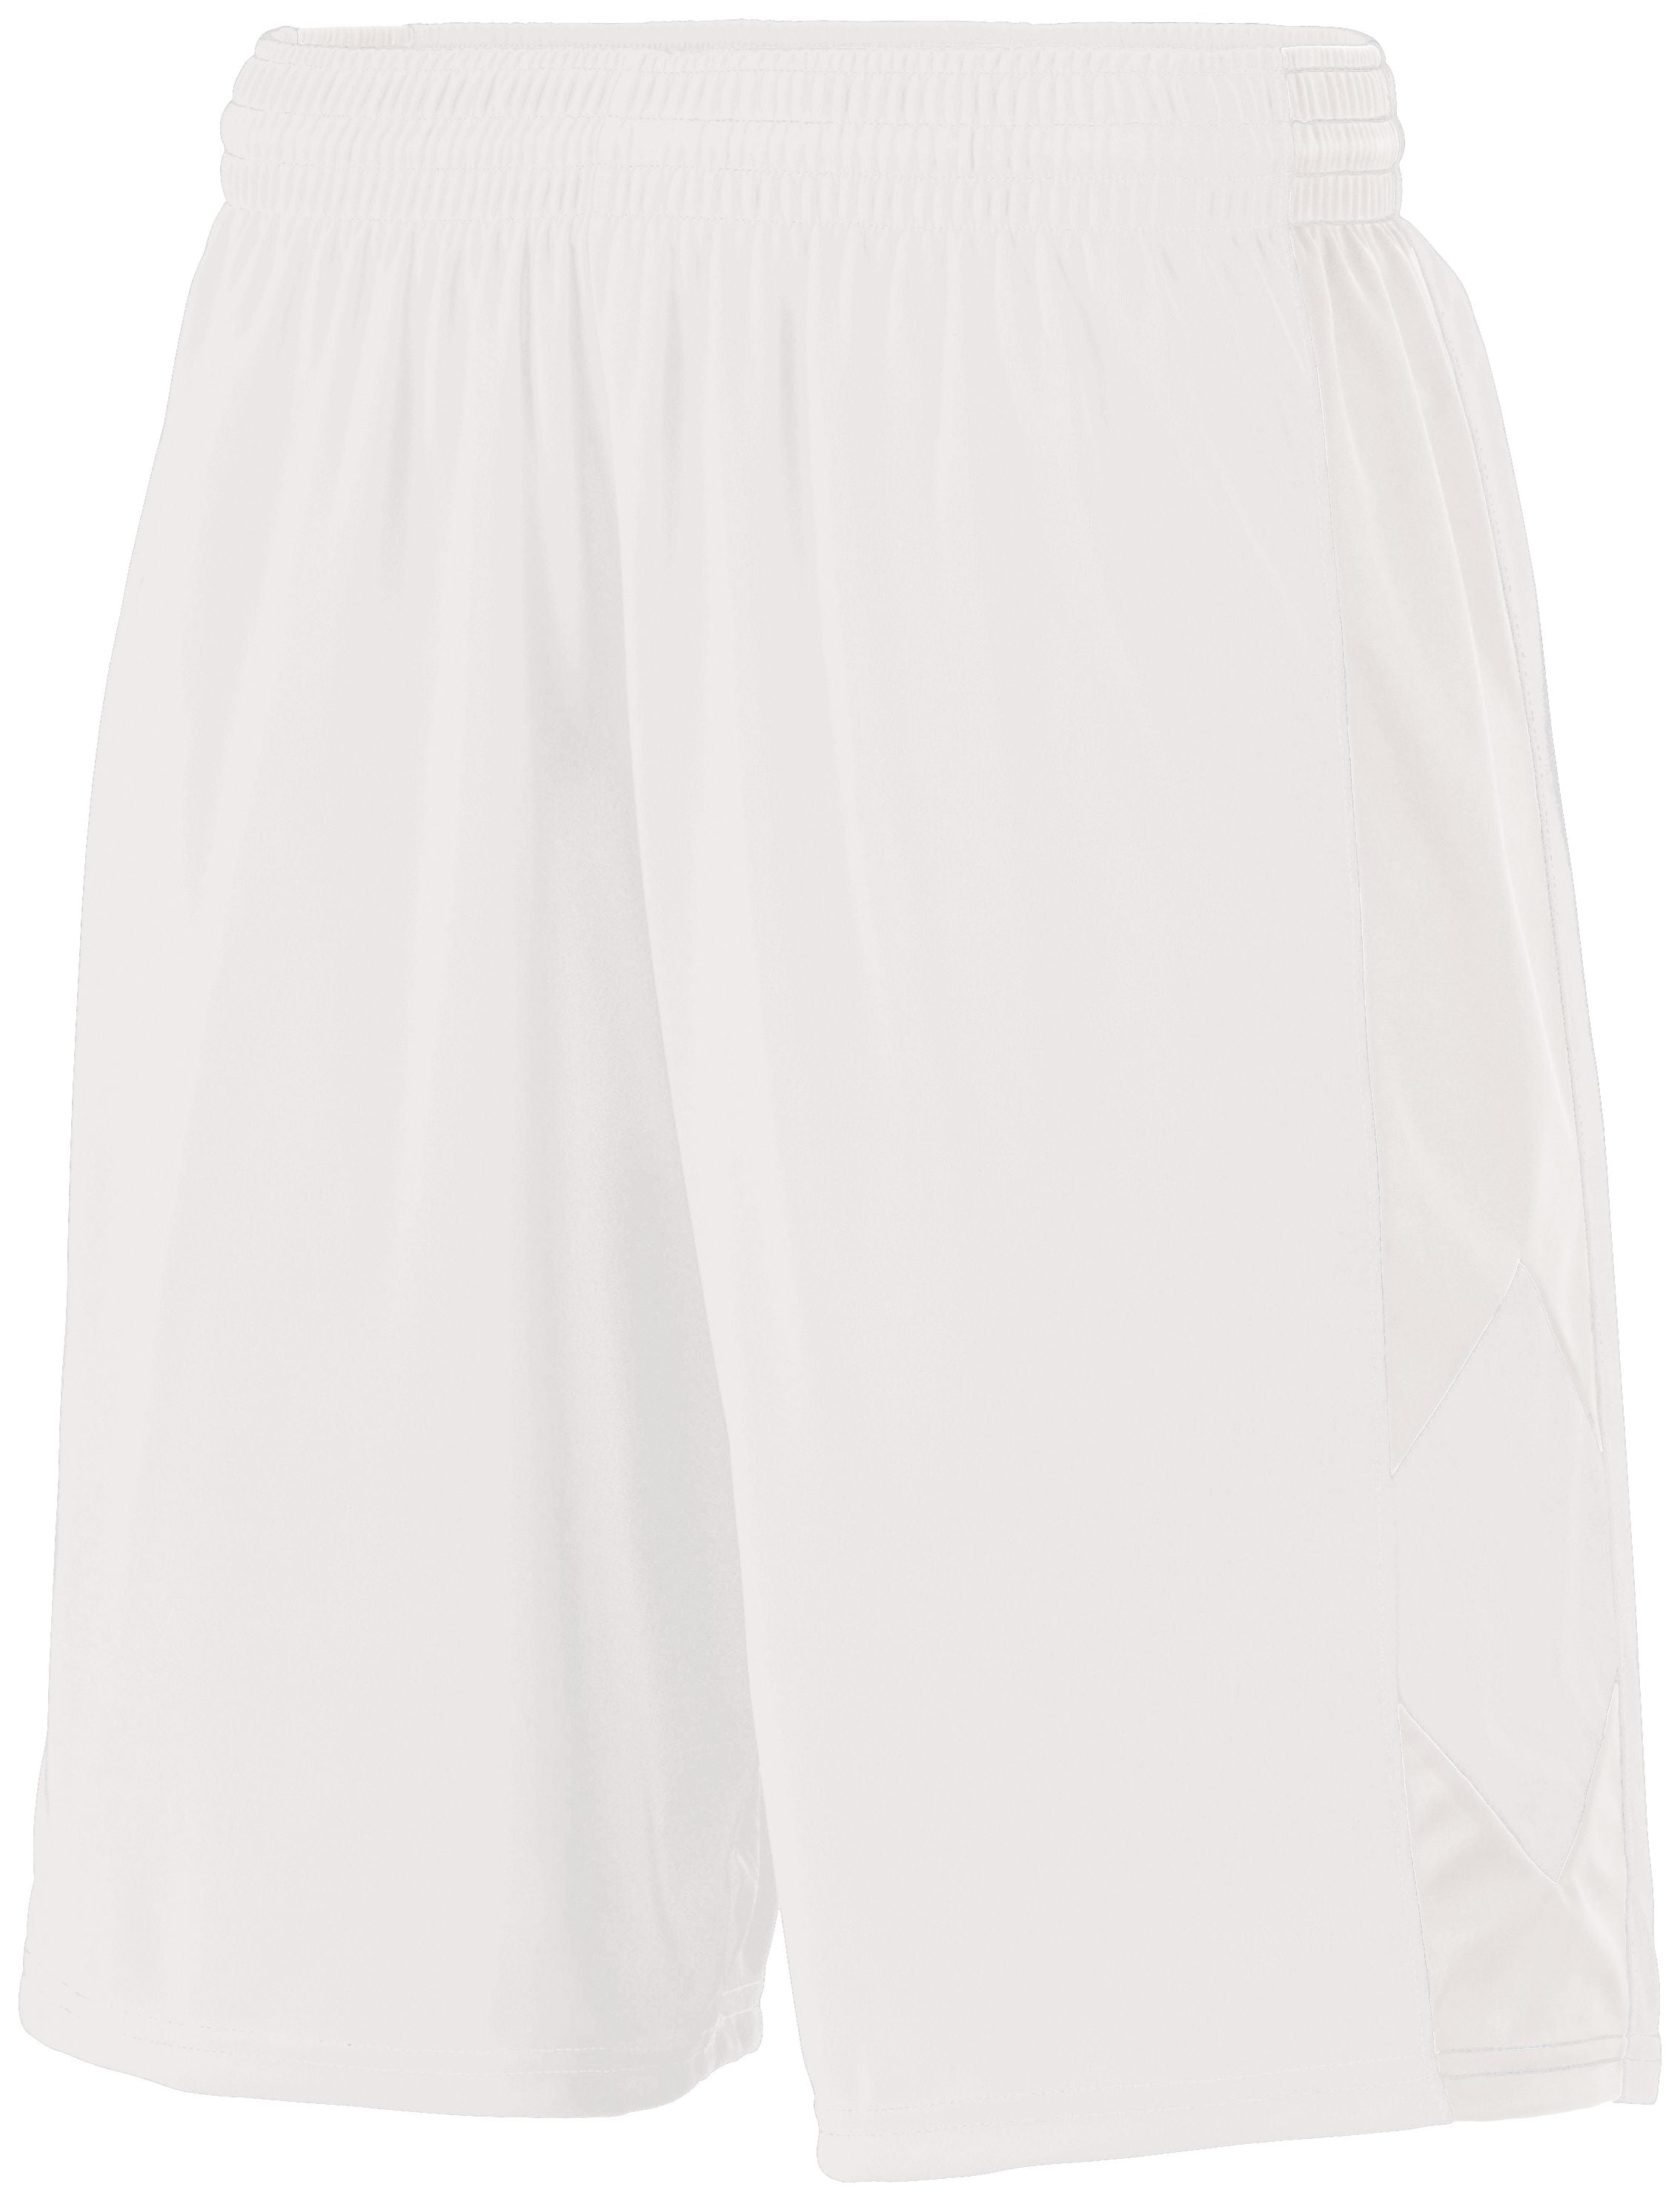 Augusta Sportswear Youth Block Out Shorts in White/White  -Part of the Youth, Youth-Shorts, Augusta-Products, Basketball, All-Sports, All-Sports-1 product lines at KanaleyCreations.com